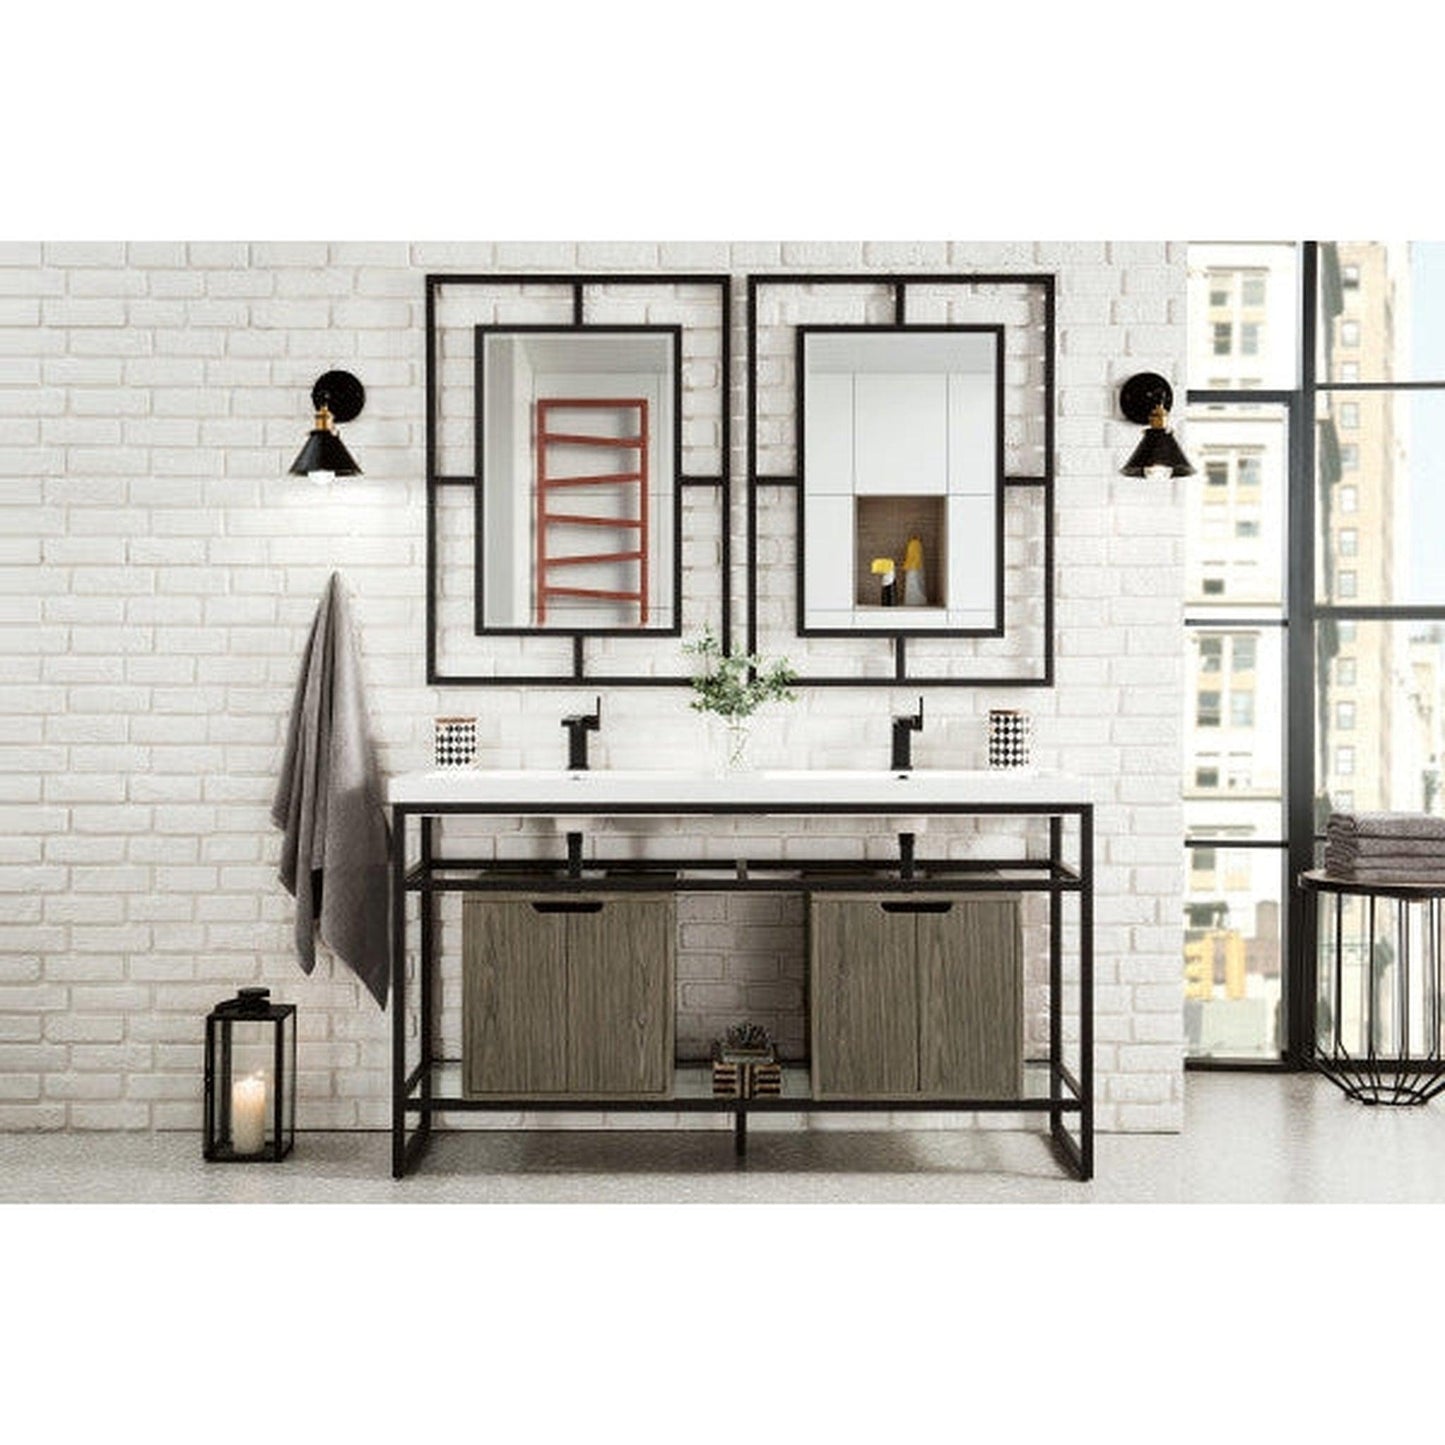 James Martin Boston 63" Double Matte Black Stainless Steel Console Sink With Ash Gray Storage Cabinet and White Glossy Composite Countertop